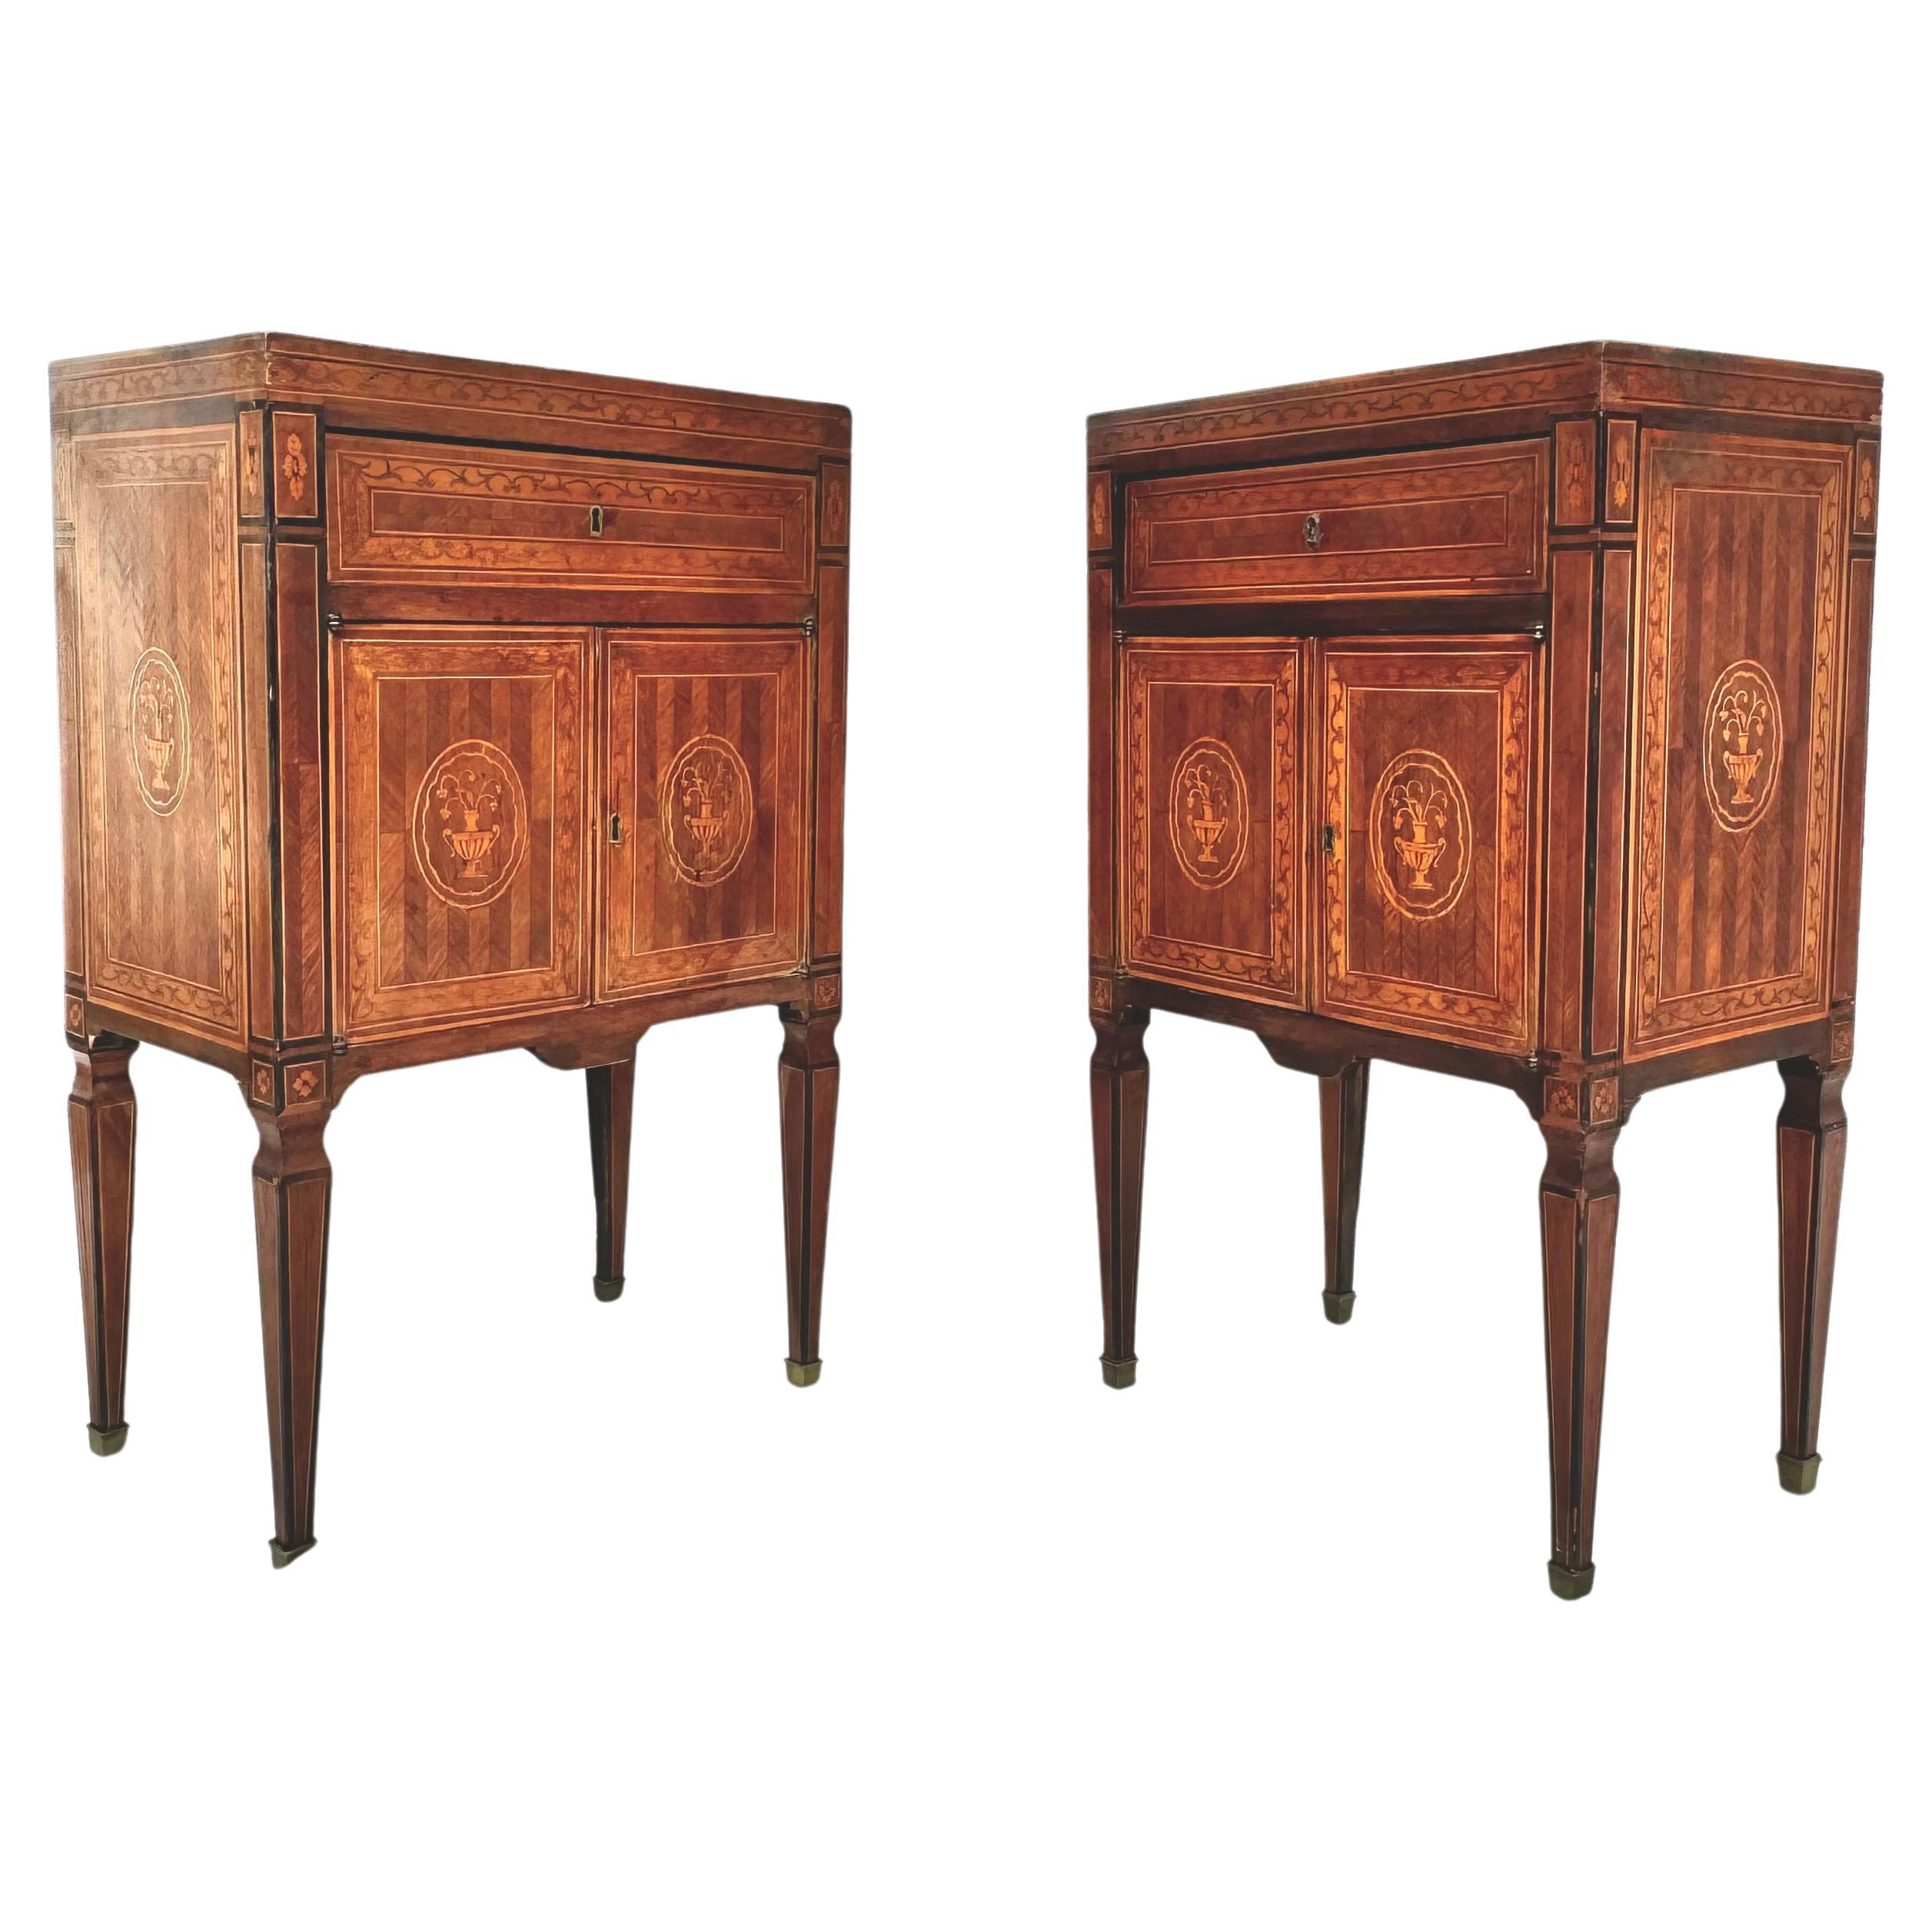 Pair Of  Italian Neoclassical Style Inlaid Bedside Cabinets